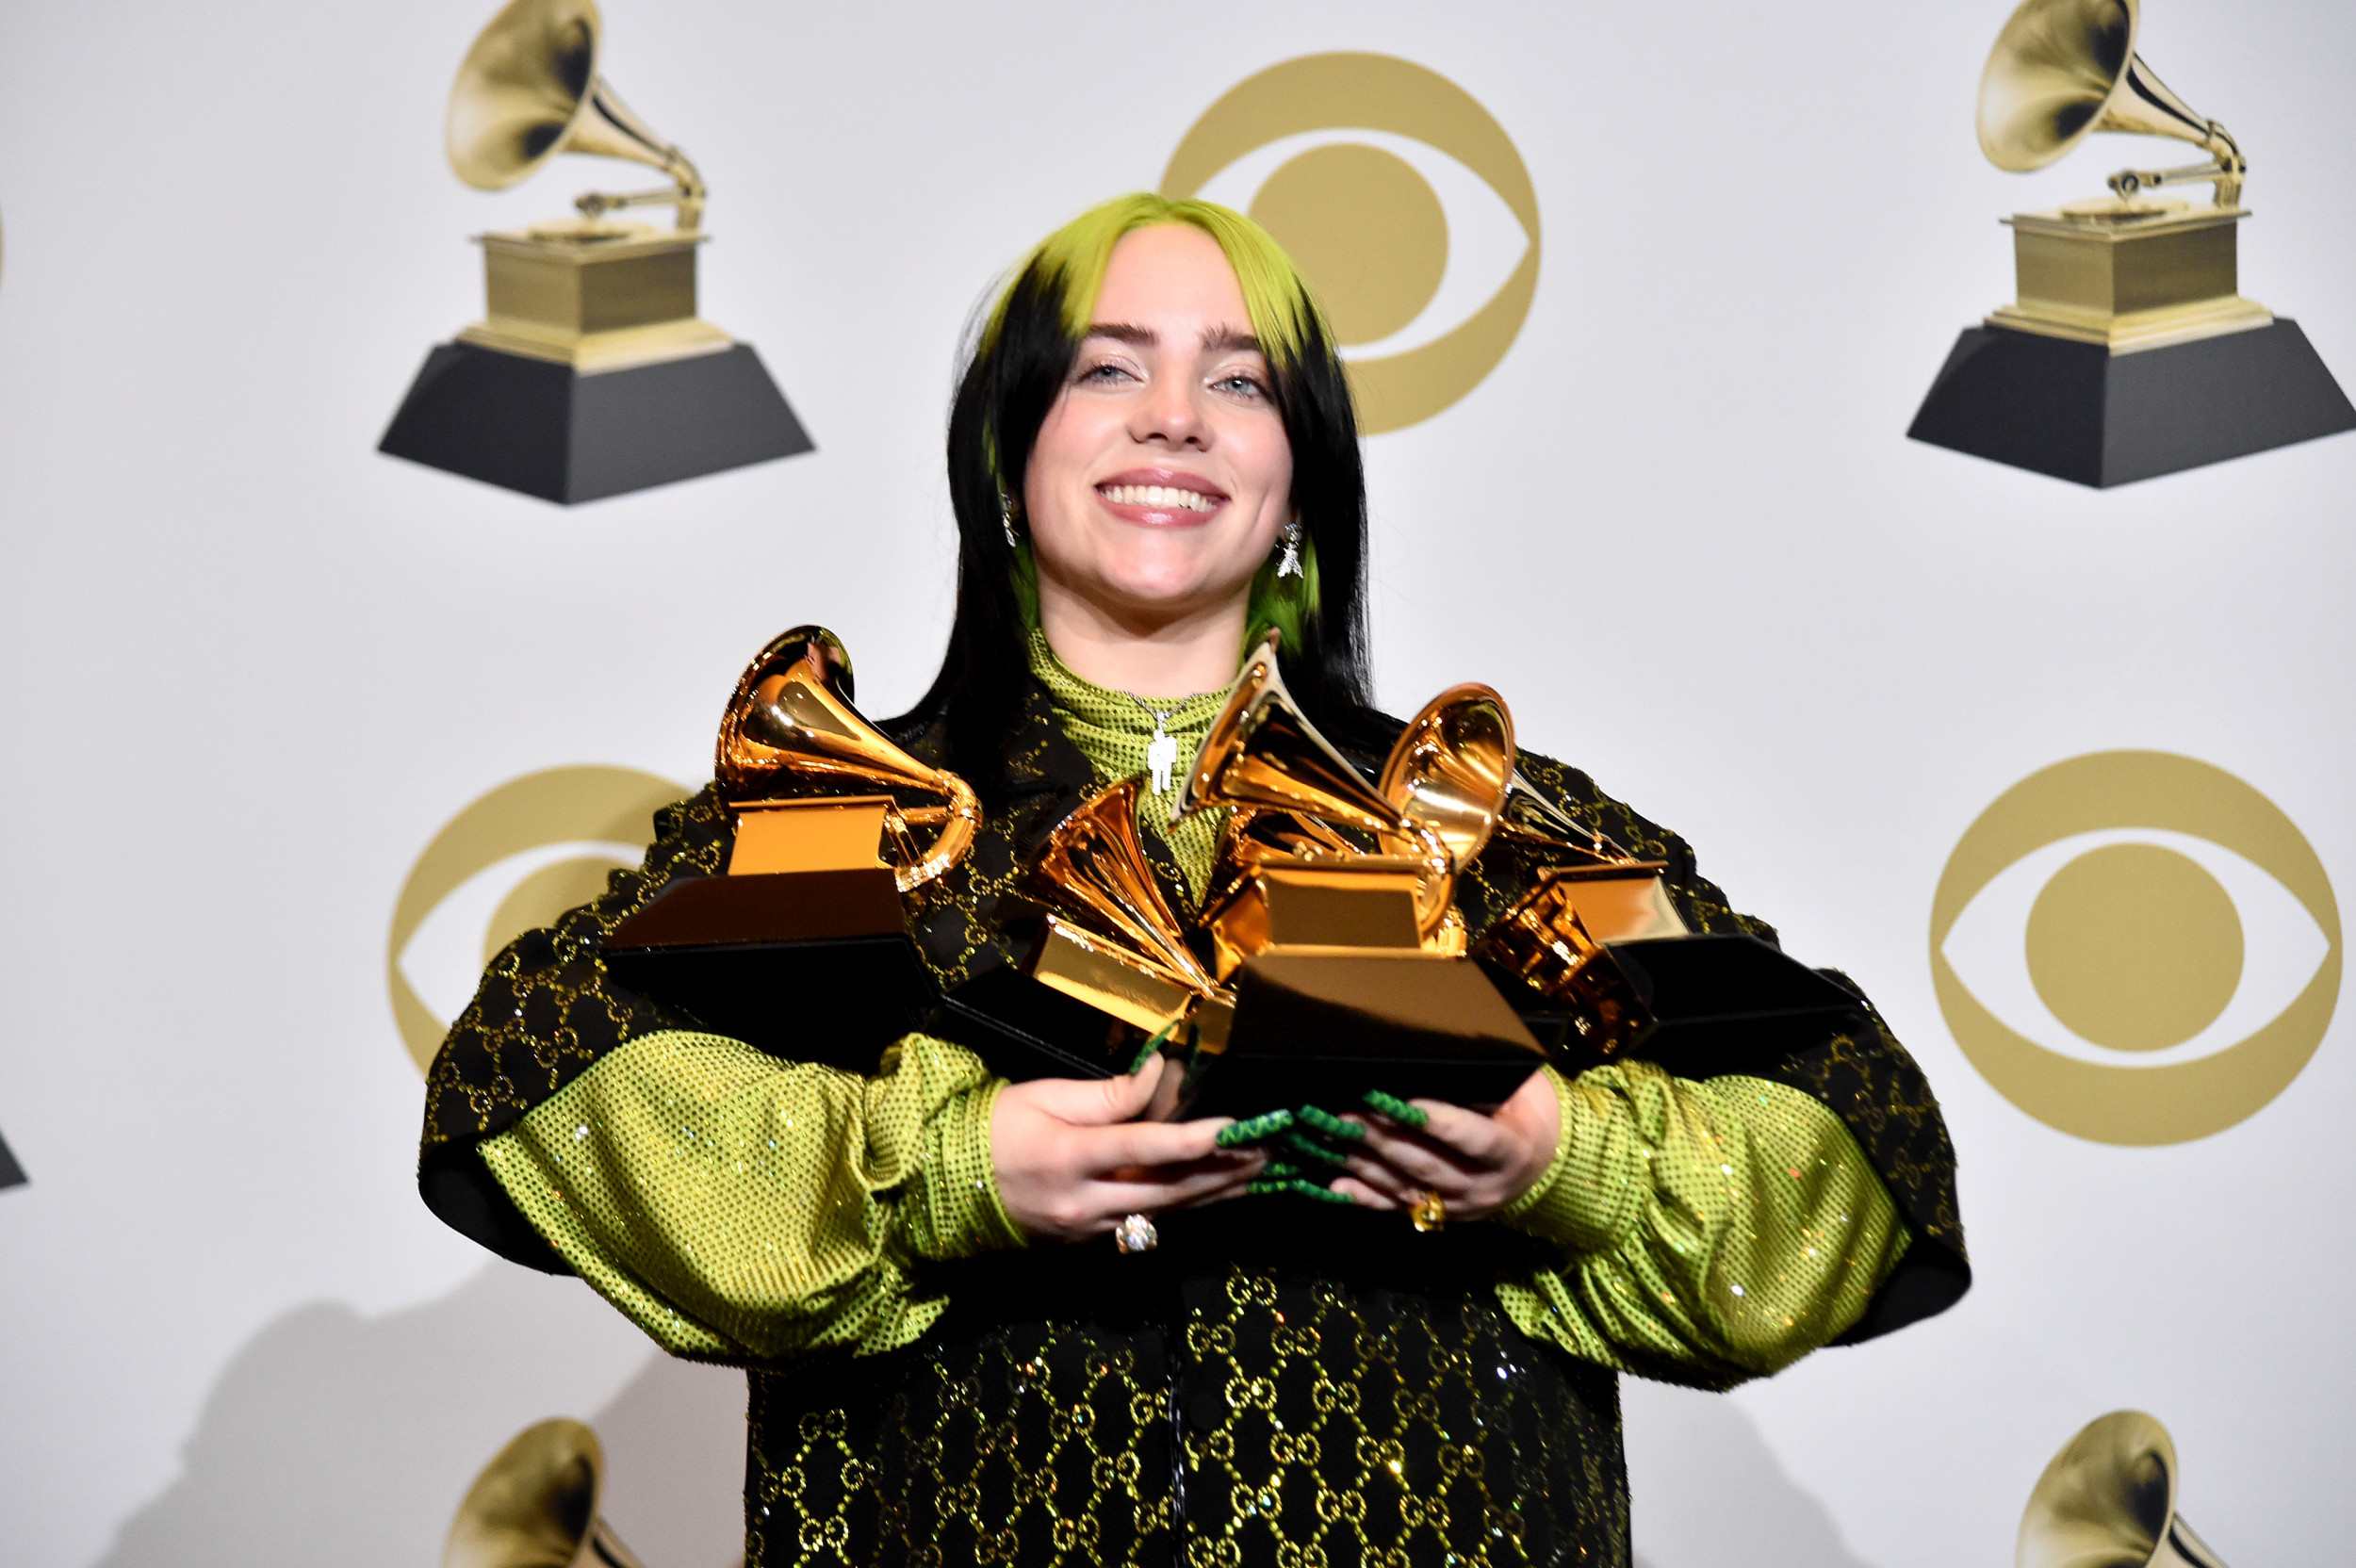 Billie Eilish Just Announced 'The World's a Little Blurry'  Documentary—Here's What to Know